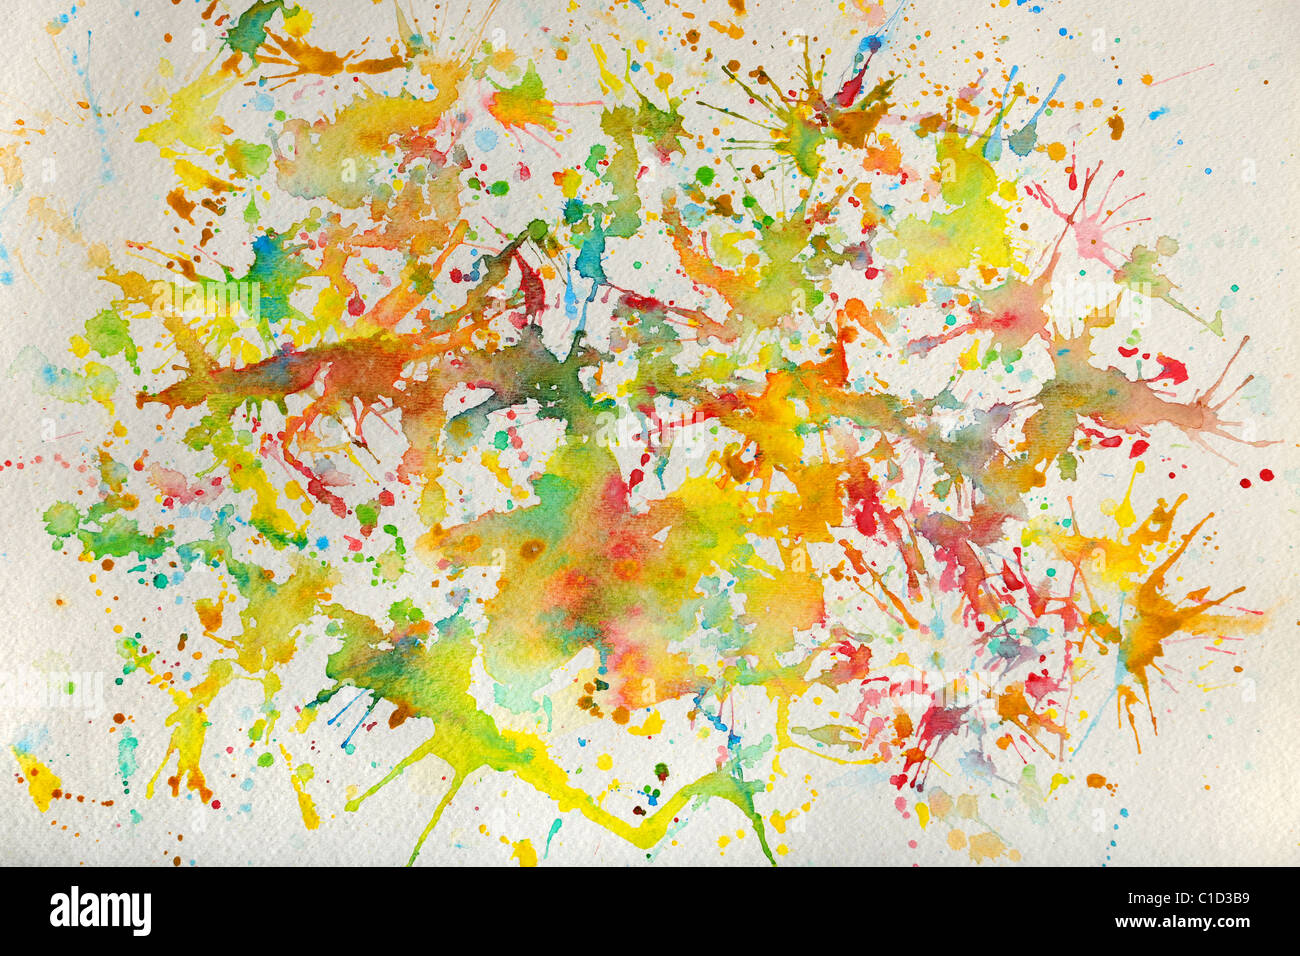 Watercolor splashes of different colors over textured paper Stock Photo